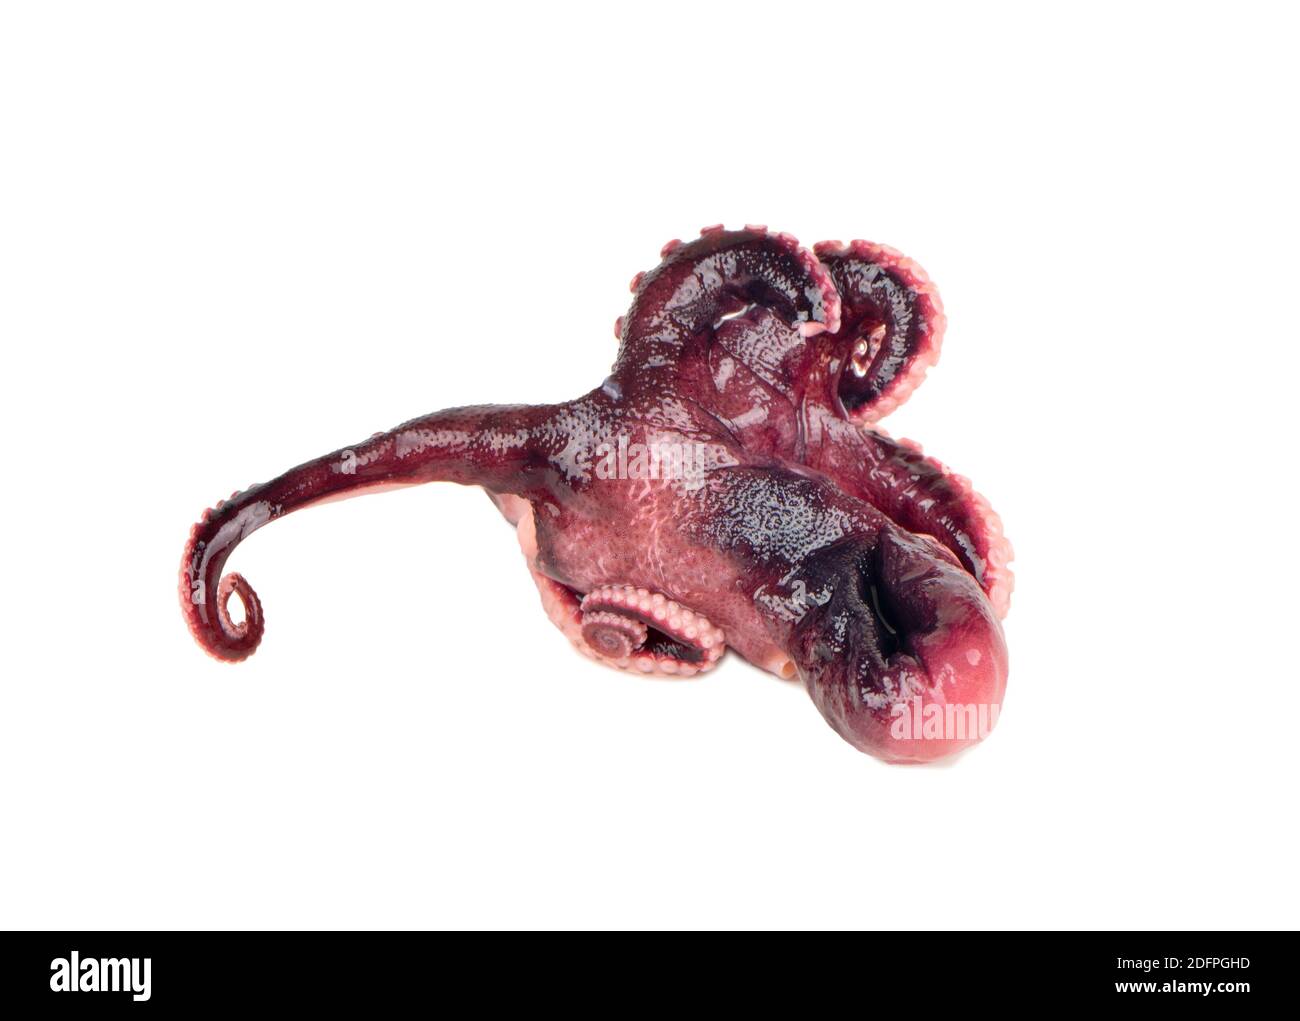 Small octopus isolated on a white background Stock Photo